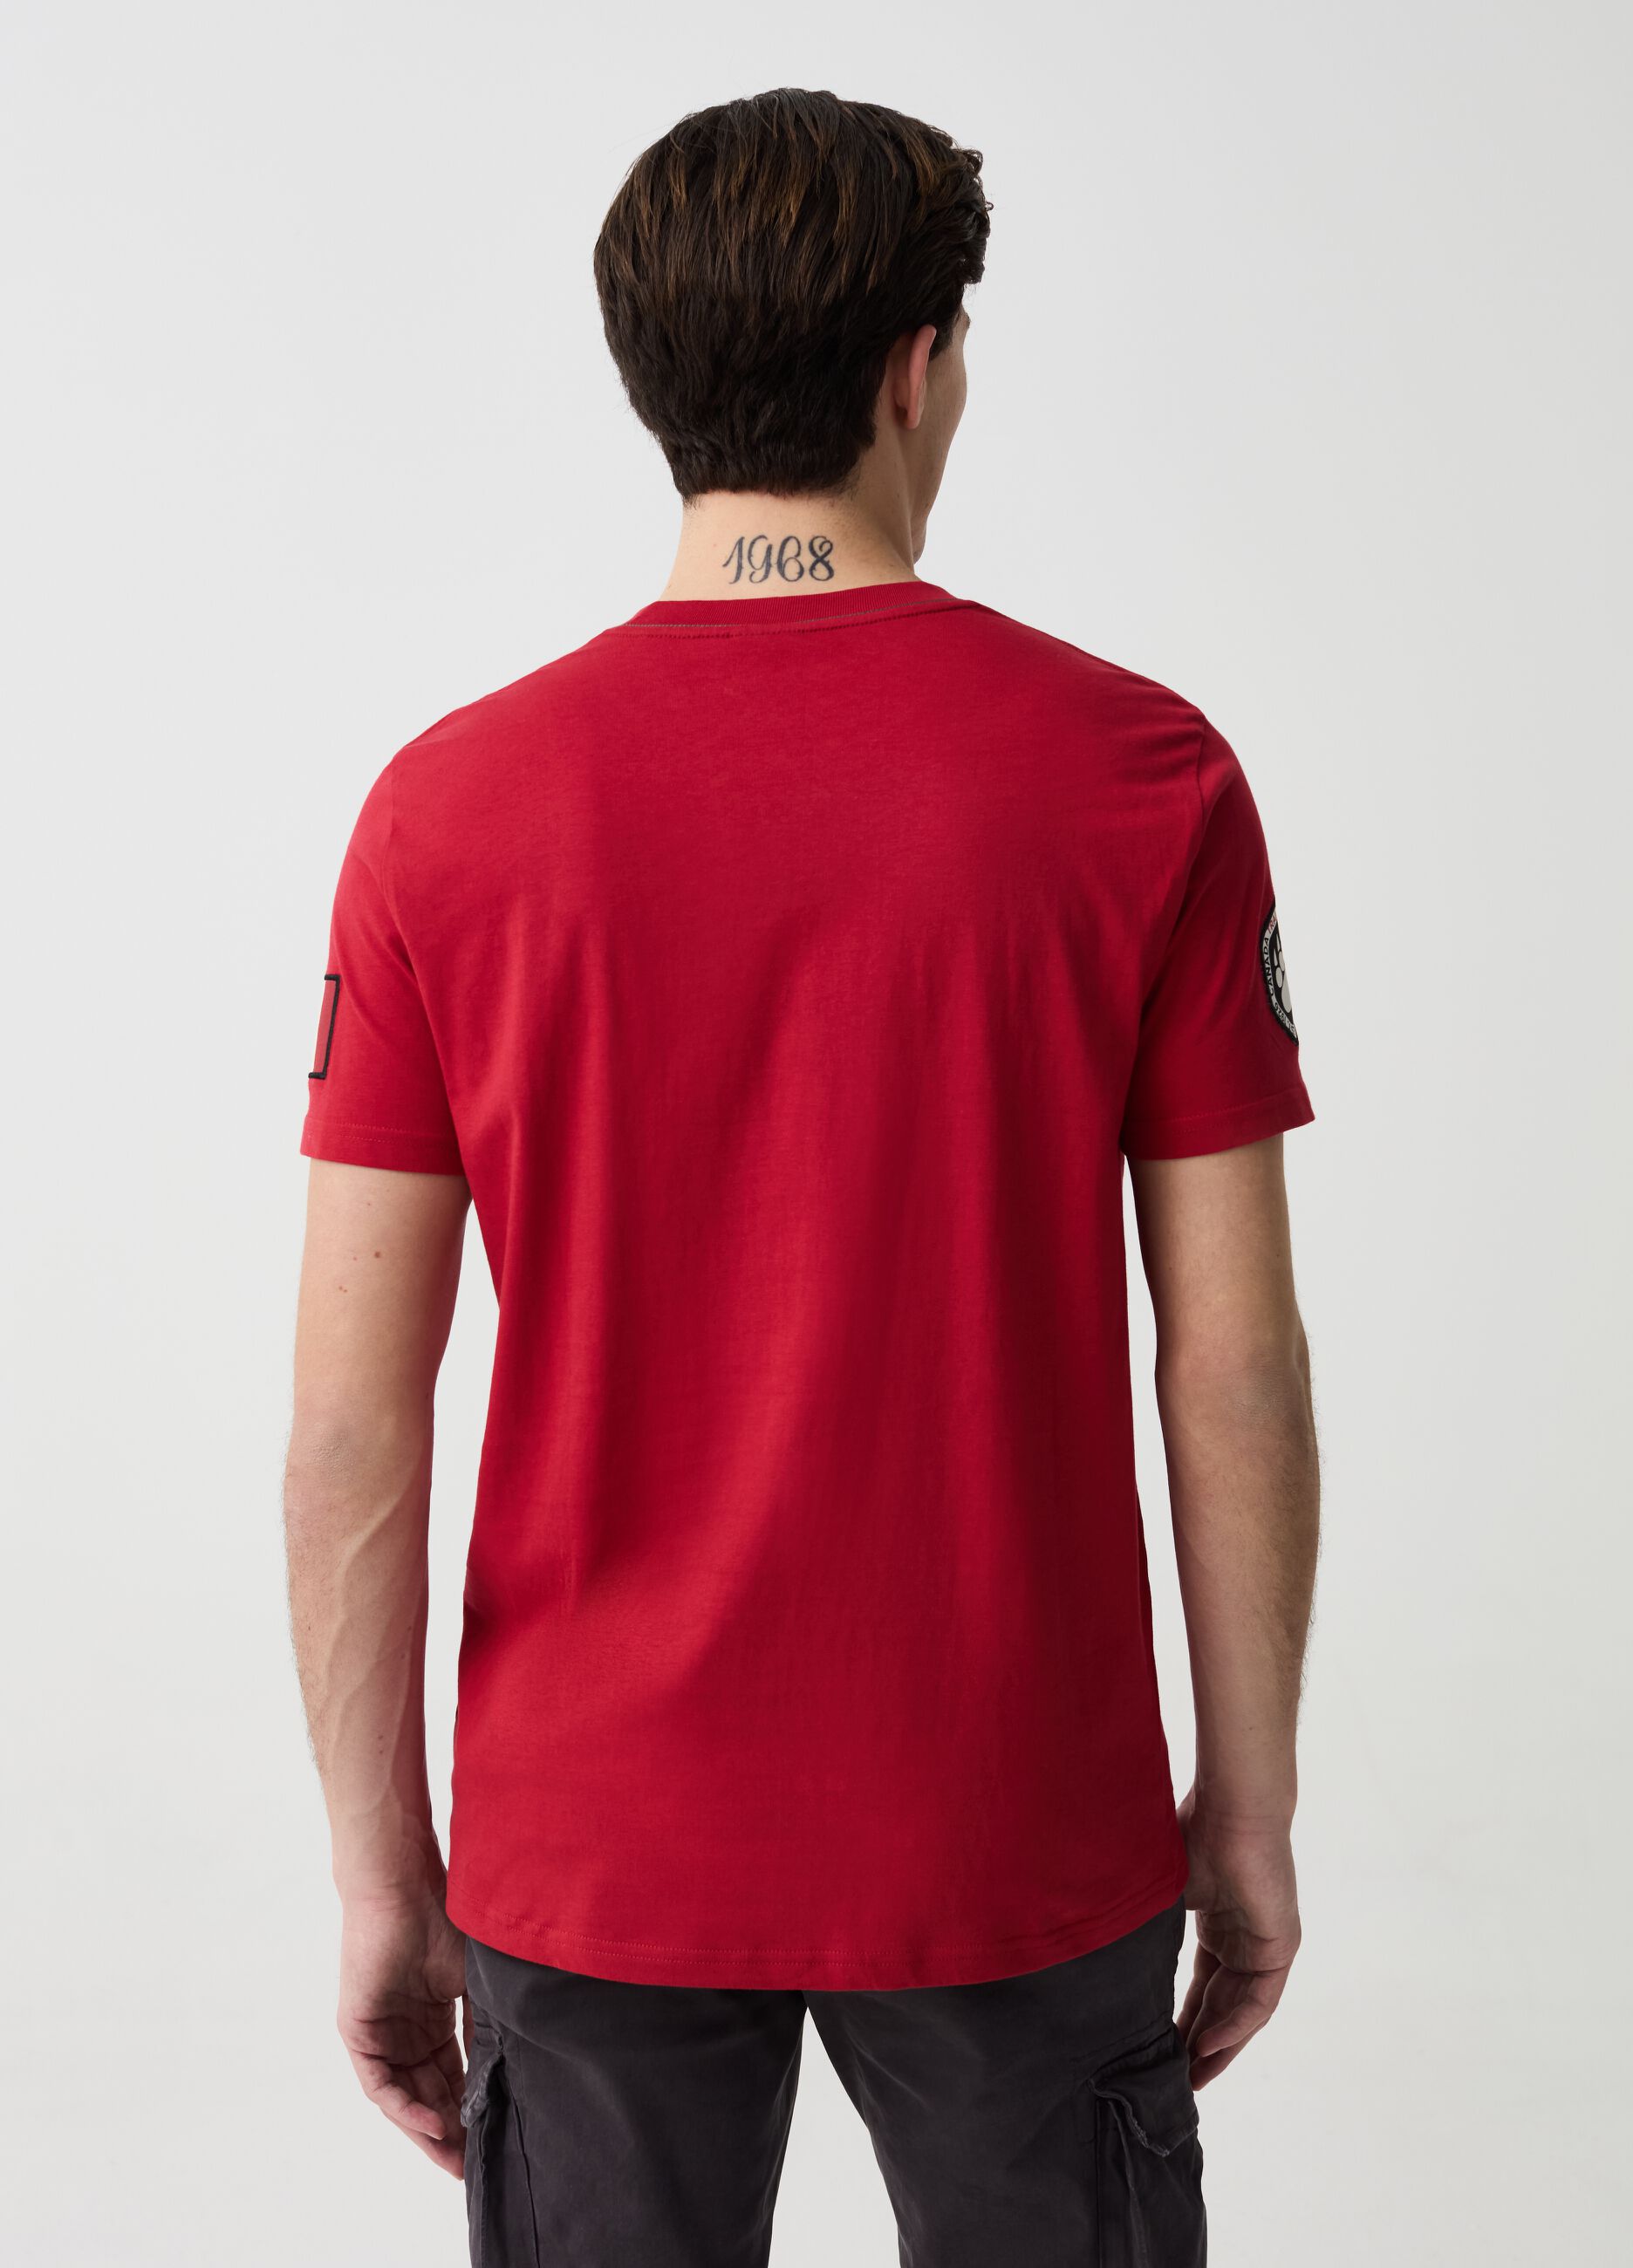 Canada Trail T-shirt with contrasting stitching